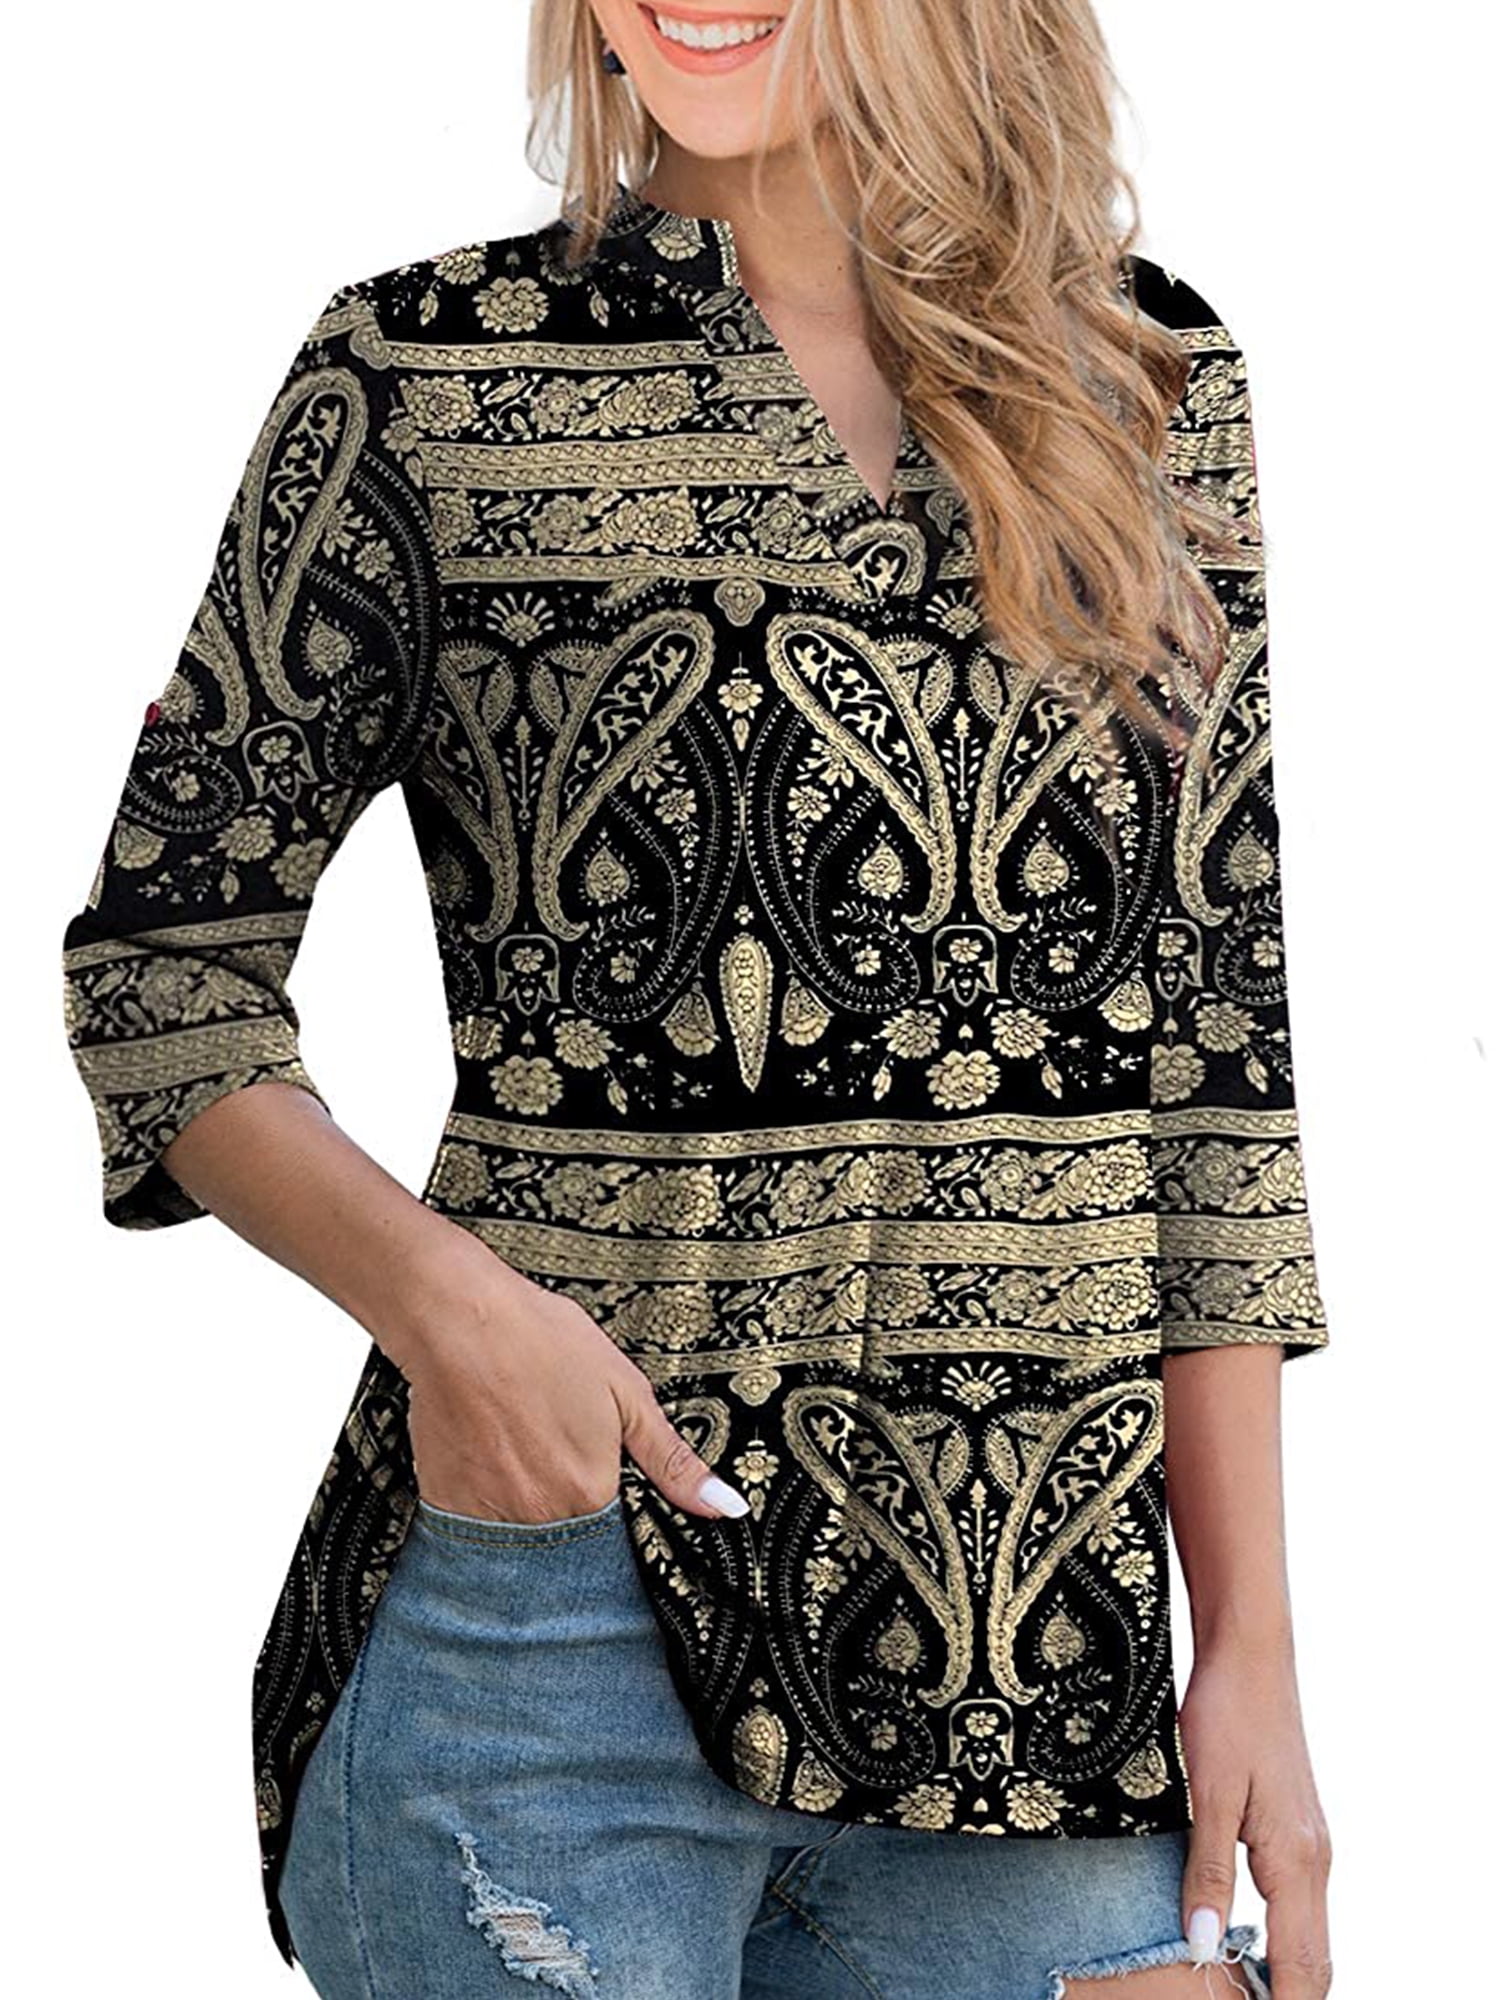 Chama Women's Plus Size 3/4 Roll Sleeves Tunic Tops Paisley Floral ...